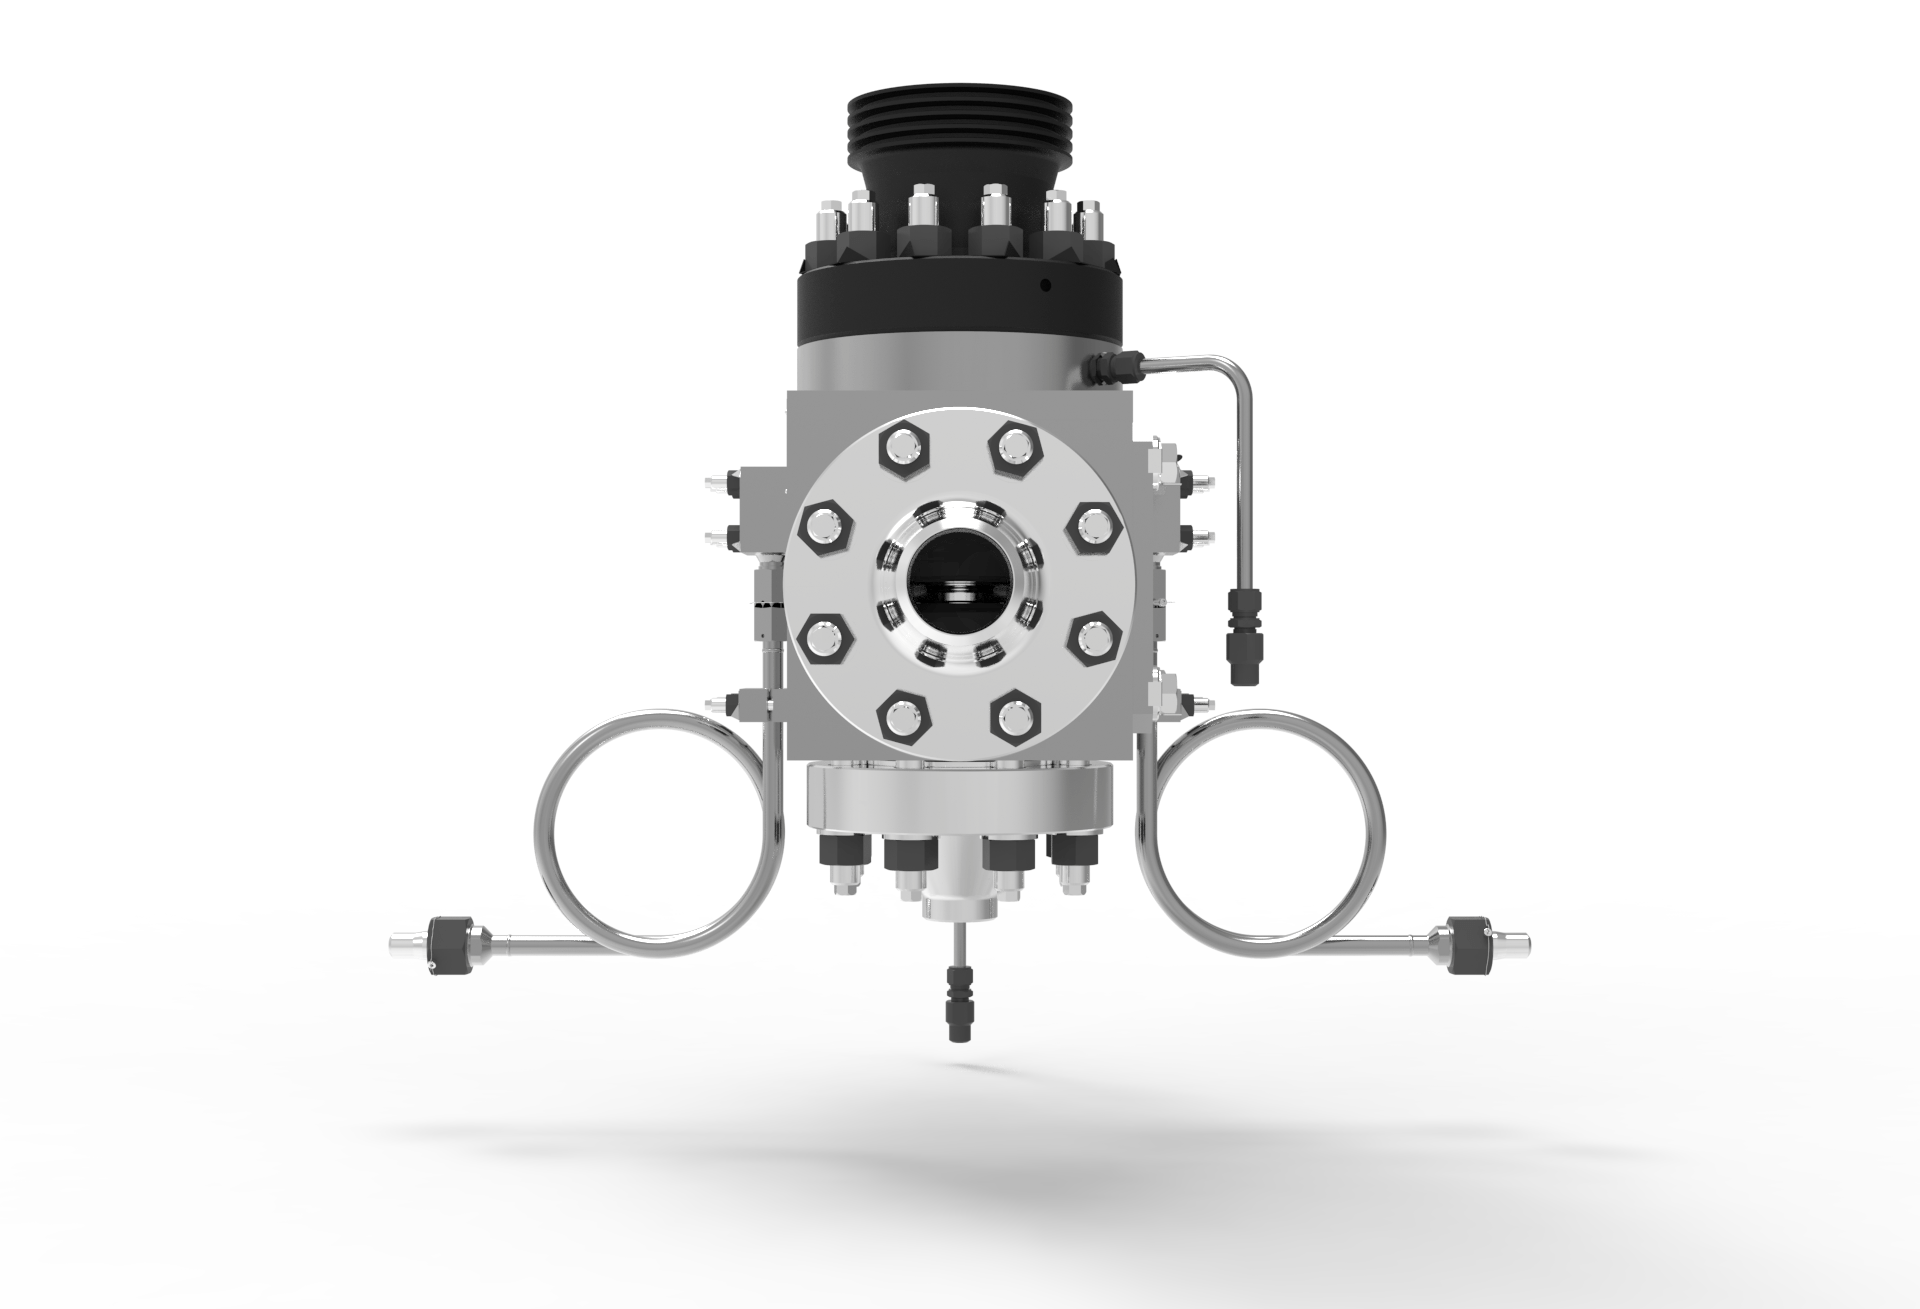 Backside view of a SEBIM CSSV 3000 Compact Single Safety Valve manufactured by Trillium Flow Technologies